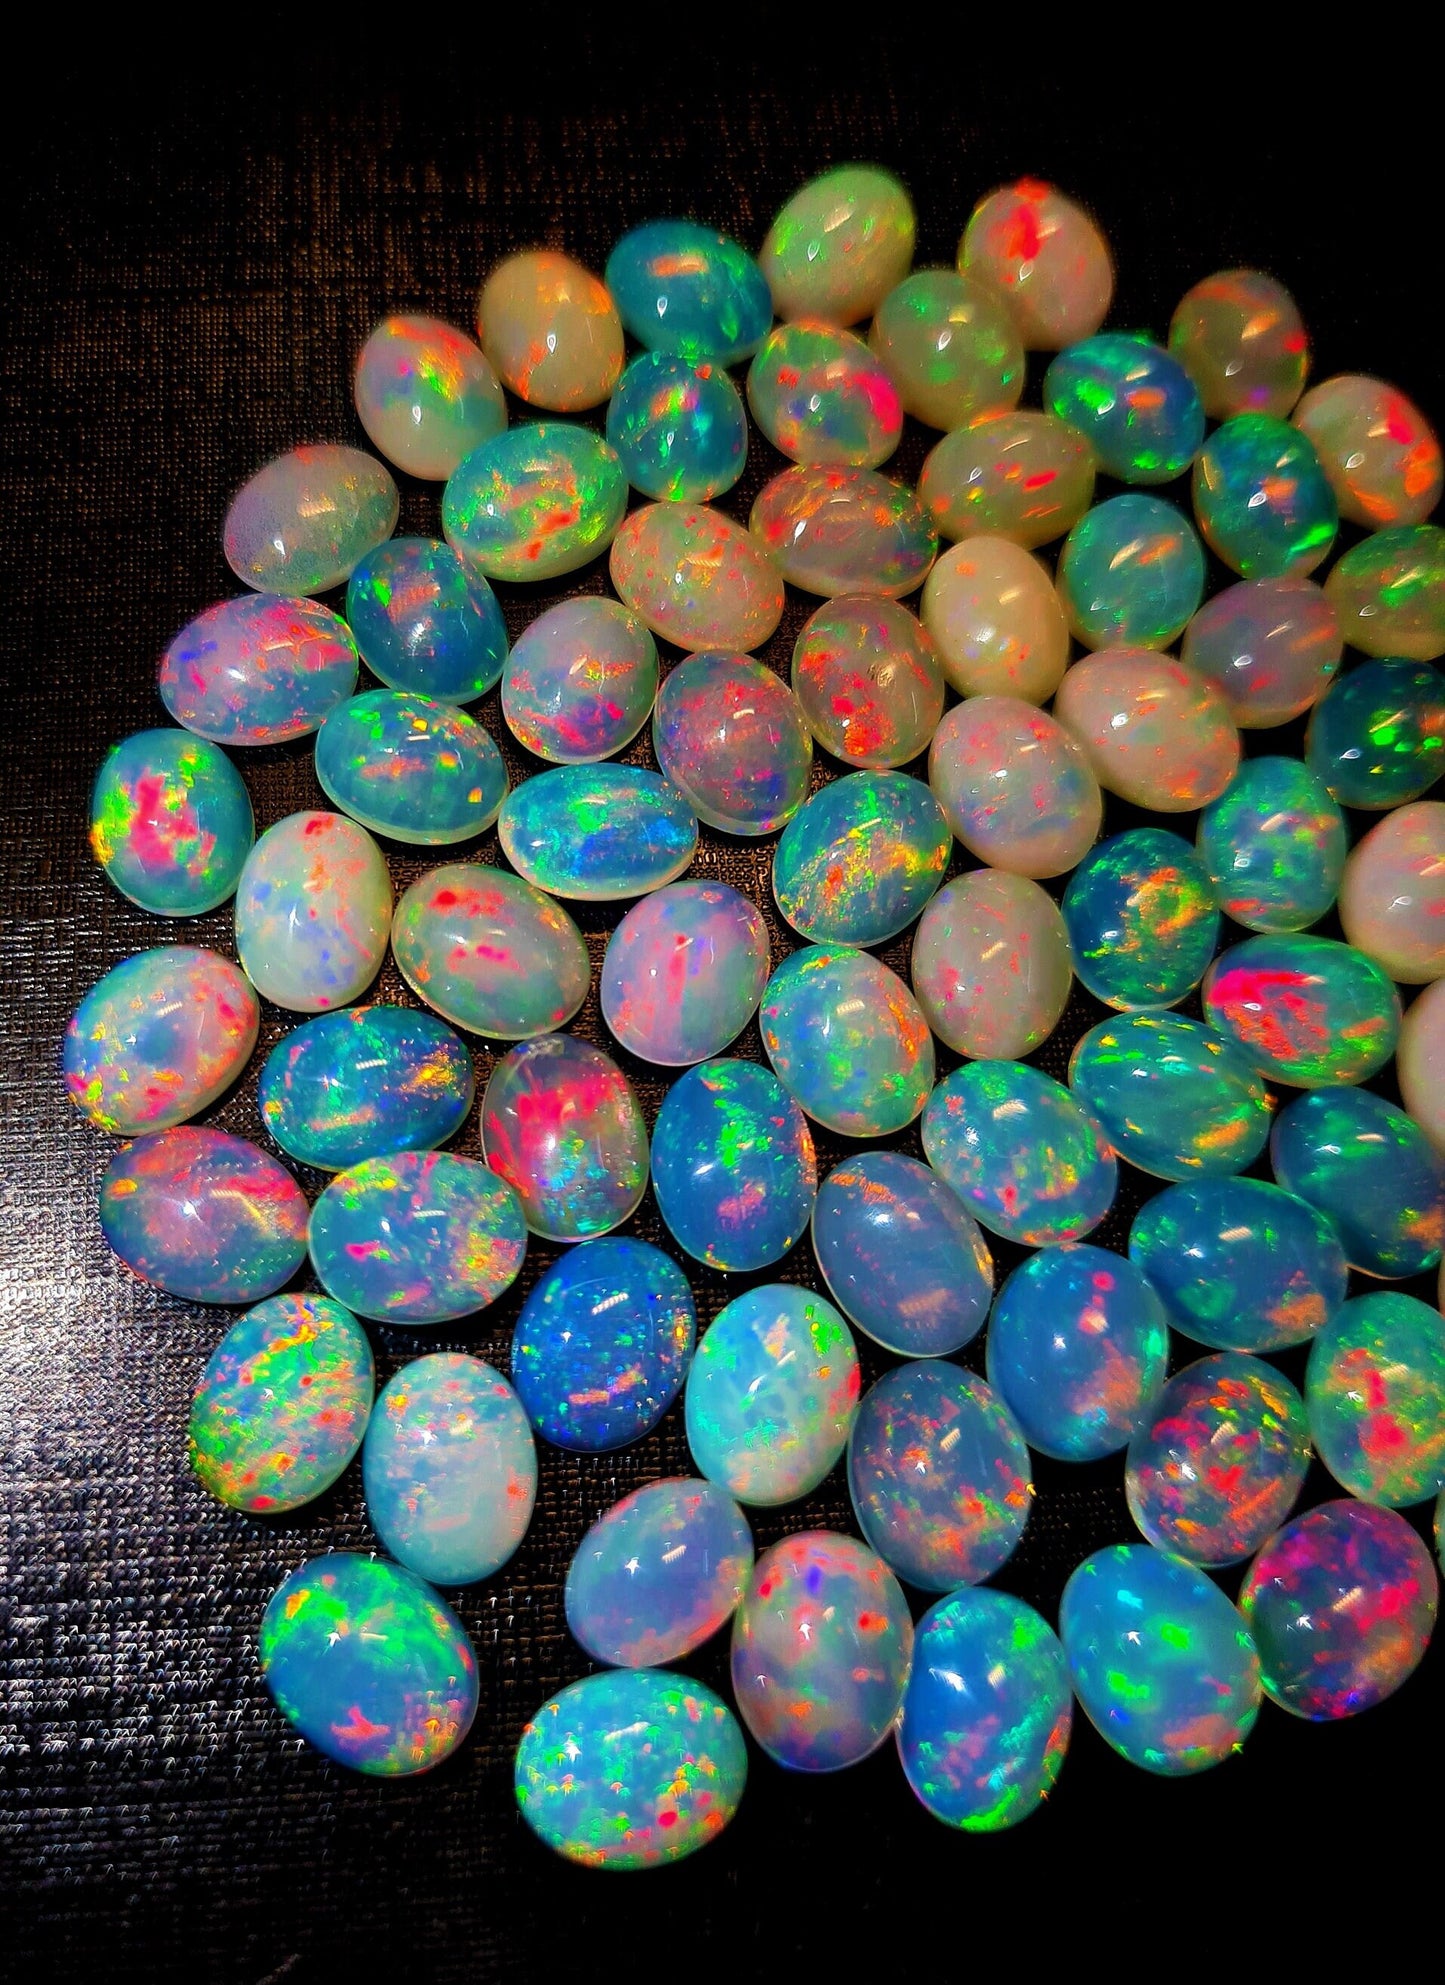 AAA Quality Natural Ethiopian Opal 7x9 mm Oval Gemstone Cabochon, Calibrated Opal Stone, Multi Fire Opal Loose Stone For Jewelry Making. (Natural)